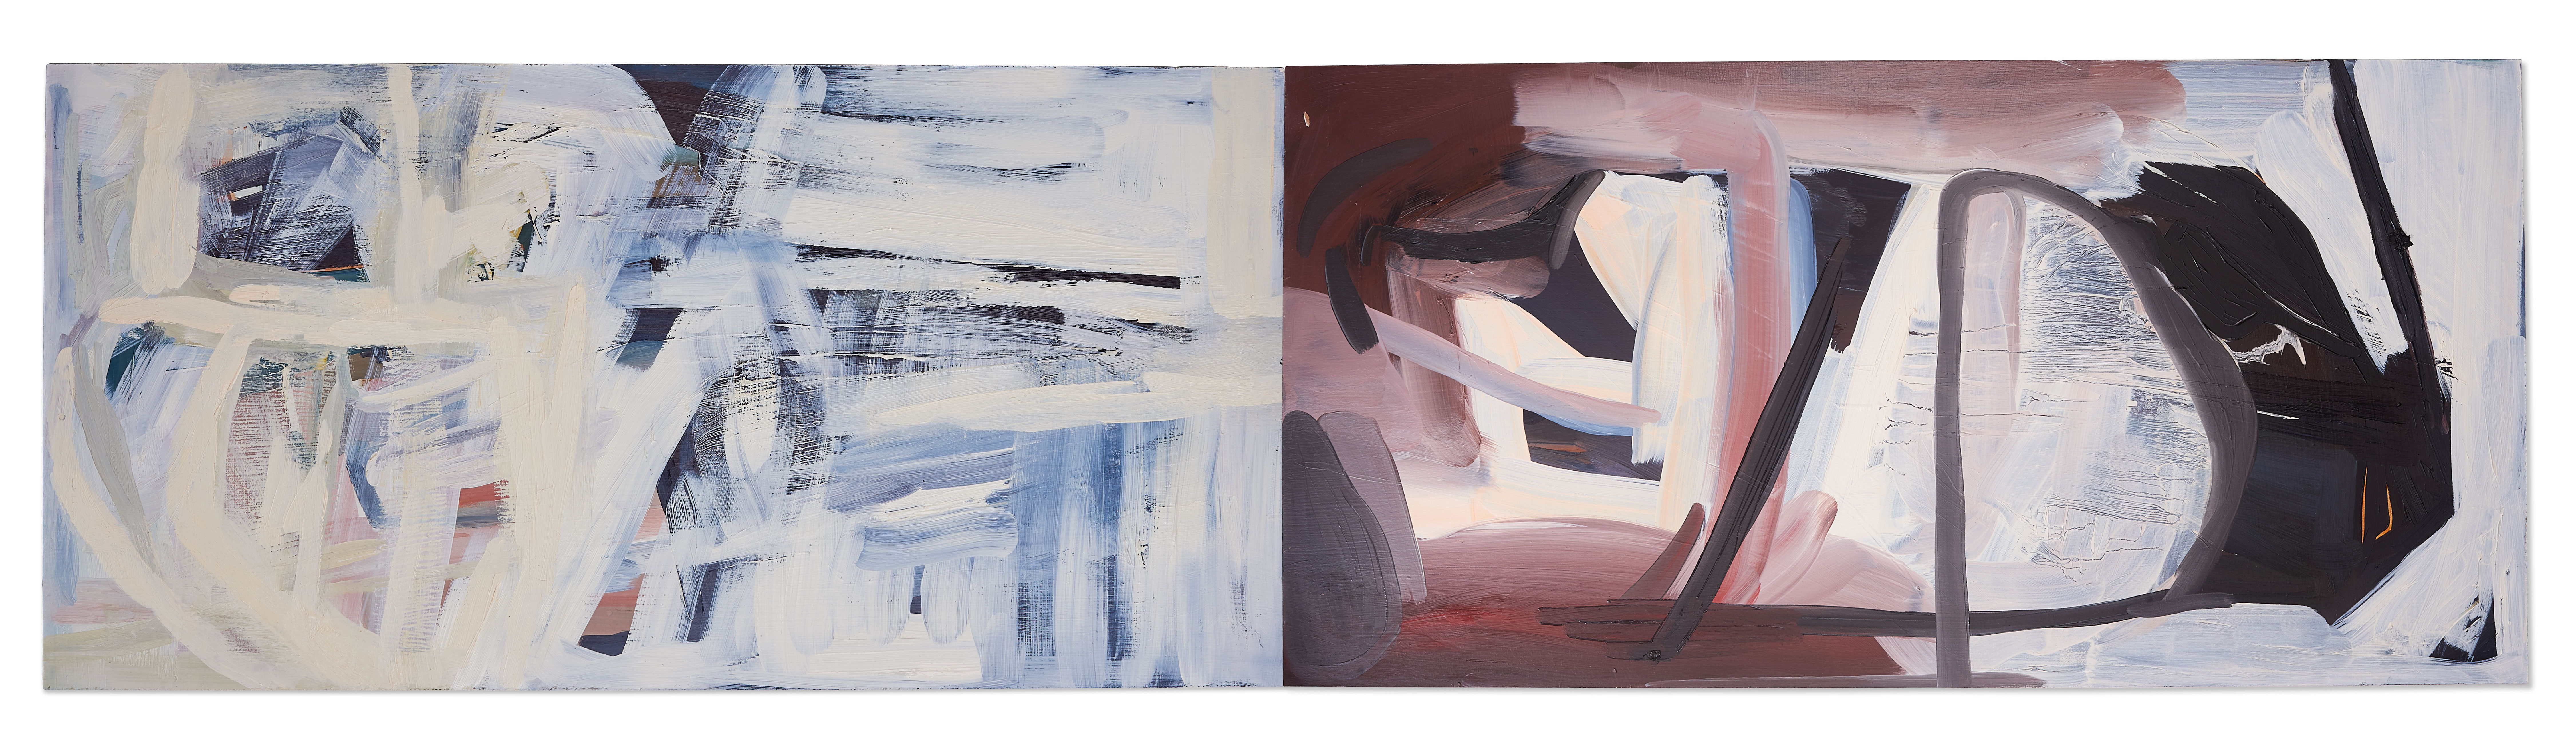 A photograph of a long, horizontal rectangular abstract painting by the artist Caroline Coolidge primarily comprised of gestural textured white, dark blue, and dull pink strokes.